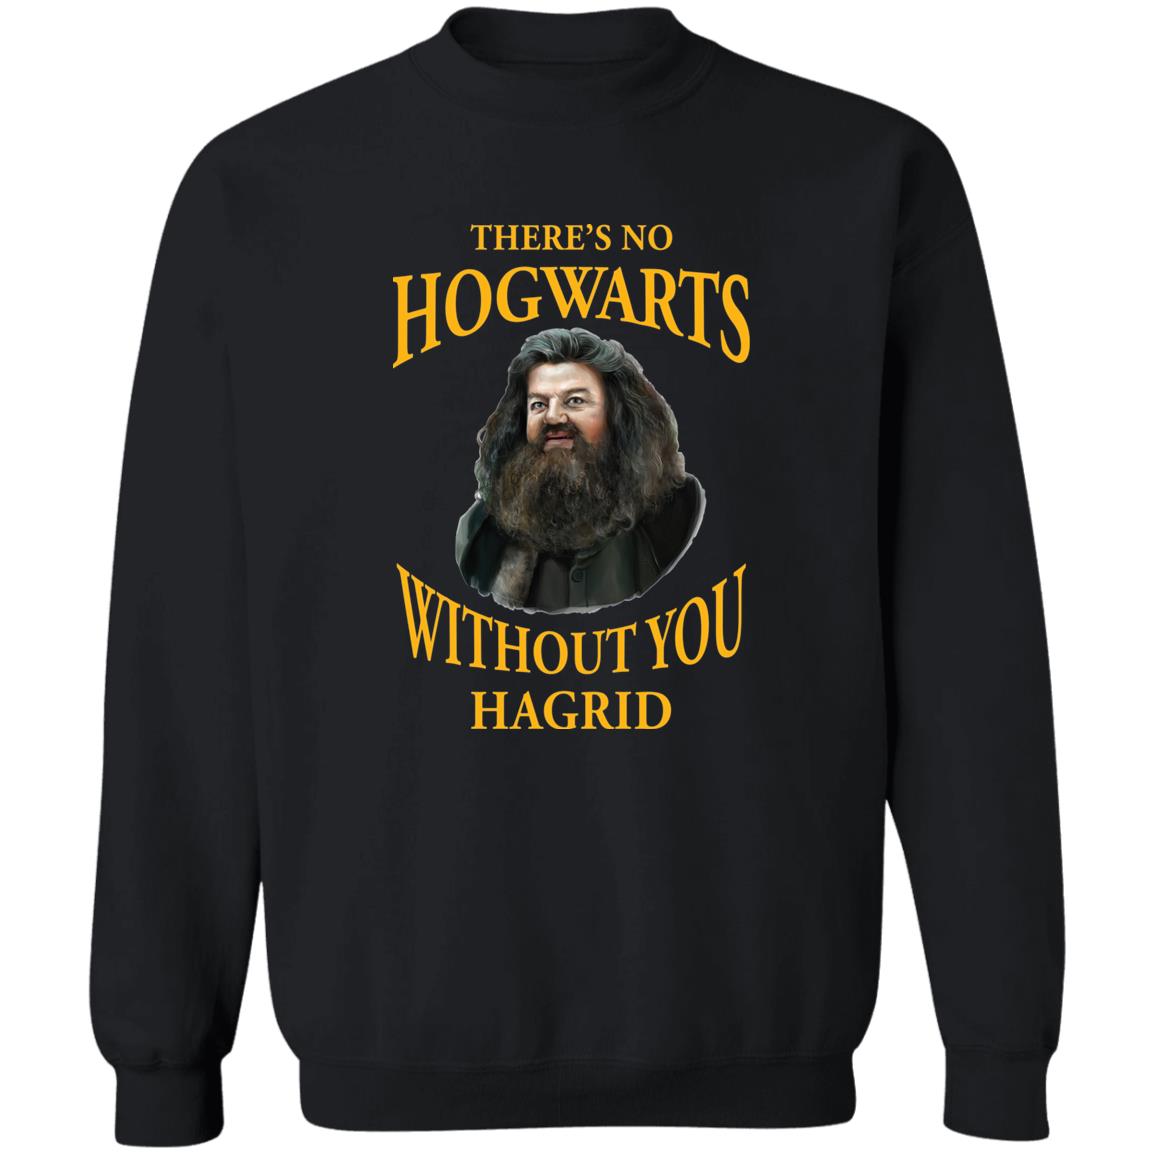 There’s No Hogwarts Without You Hagrid Shirt 2